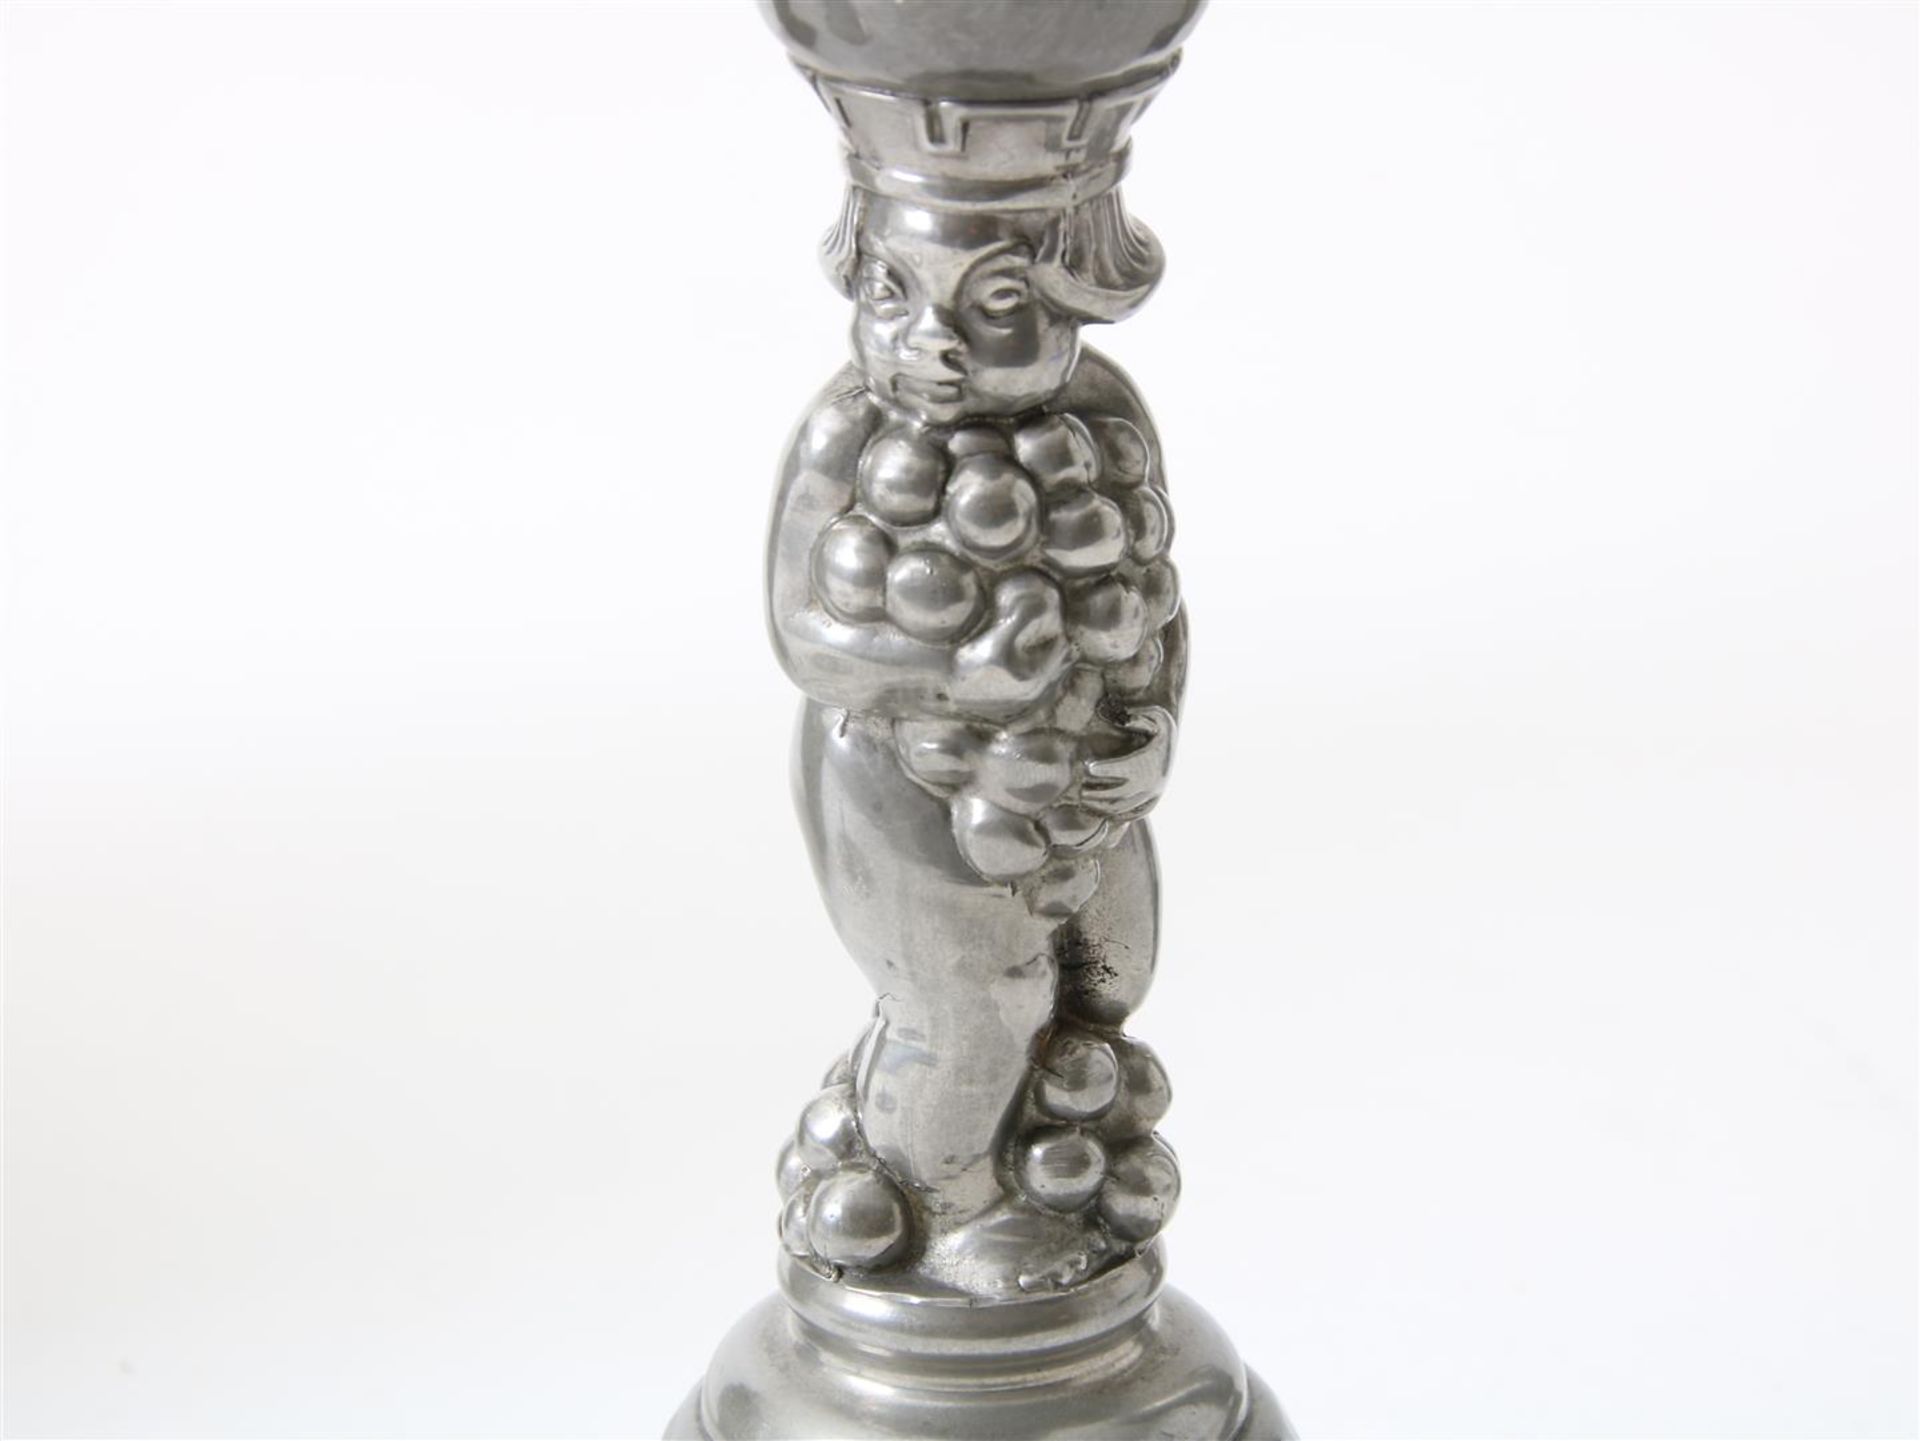 Lot of an Art Deco pewter vase on an openwork base, ashtray, candlestick and vase with Cockatoos, - Image 3 of 6